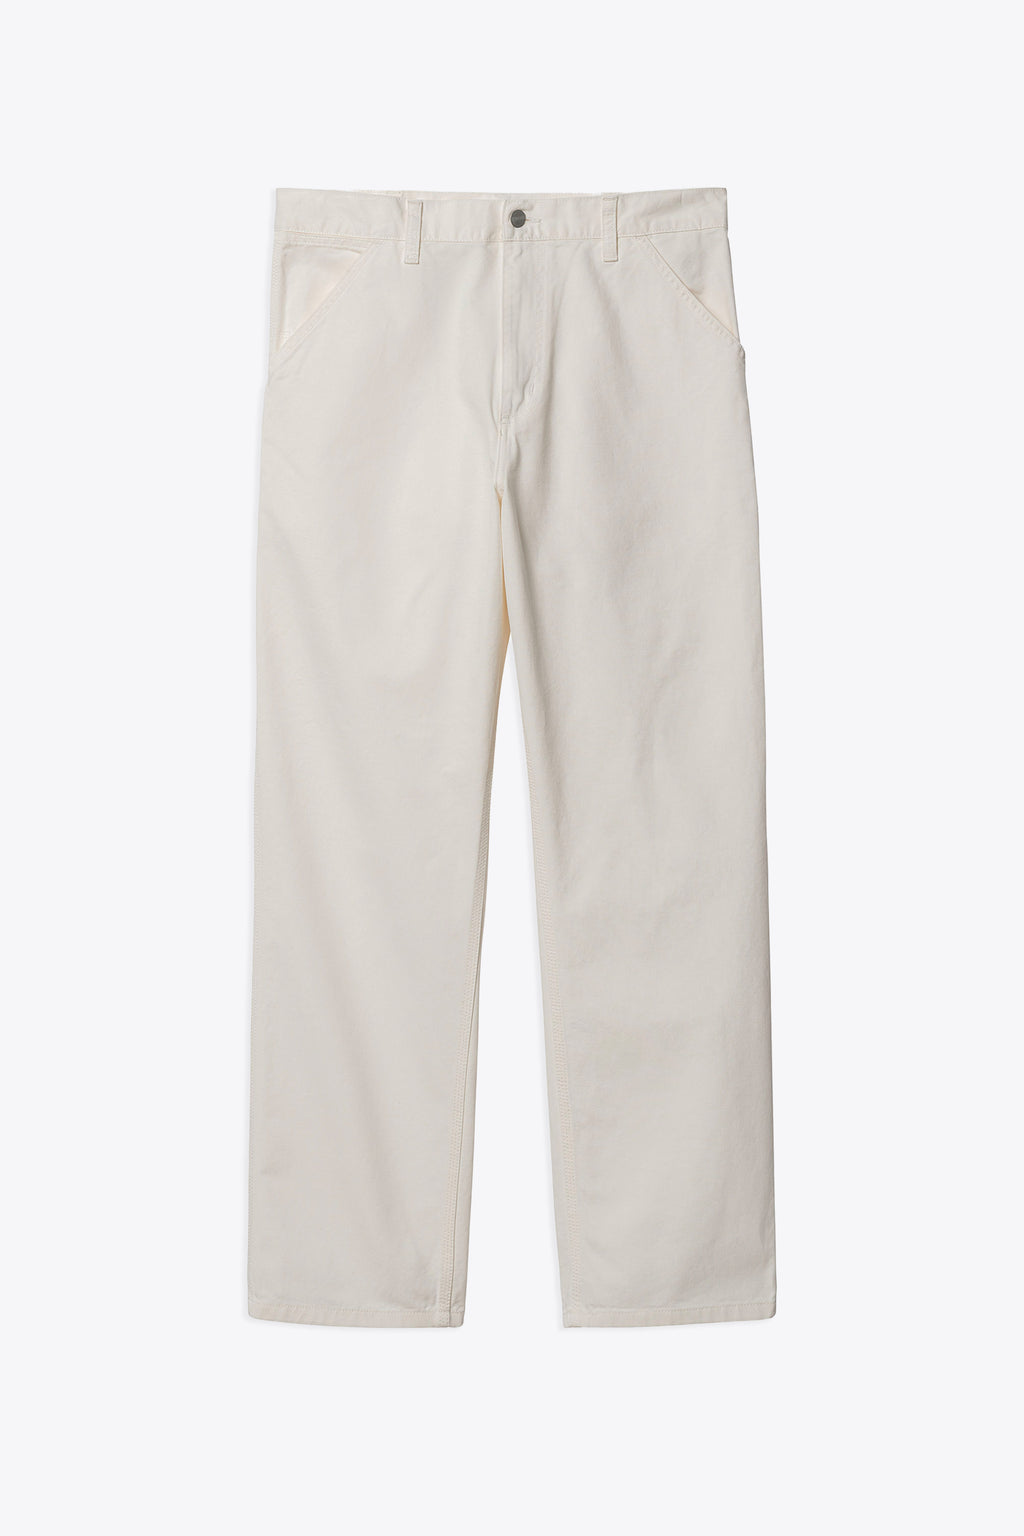 alt-image__Off-white-cotton-drill-worker-pant---Single-Knee-Pant-